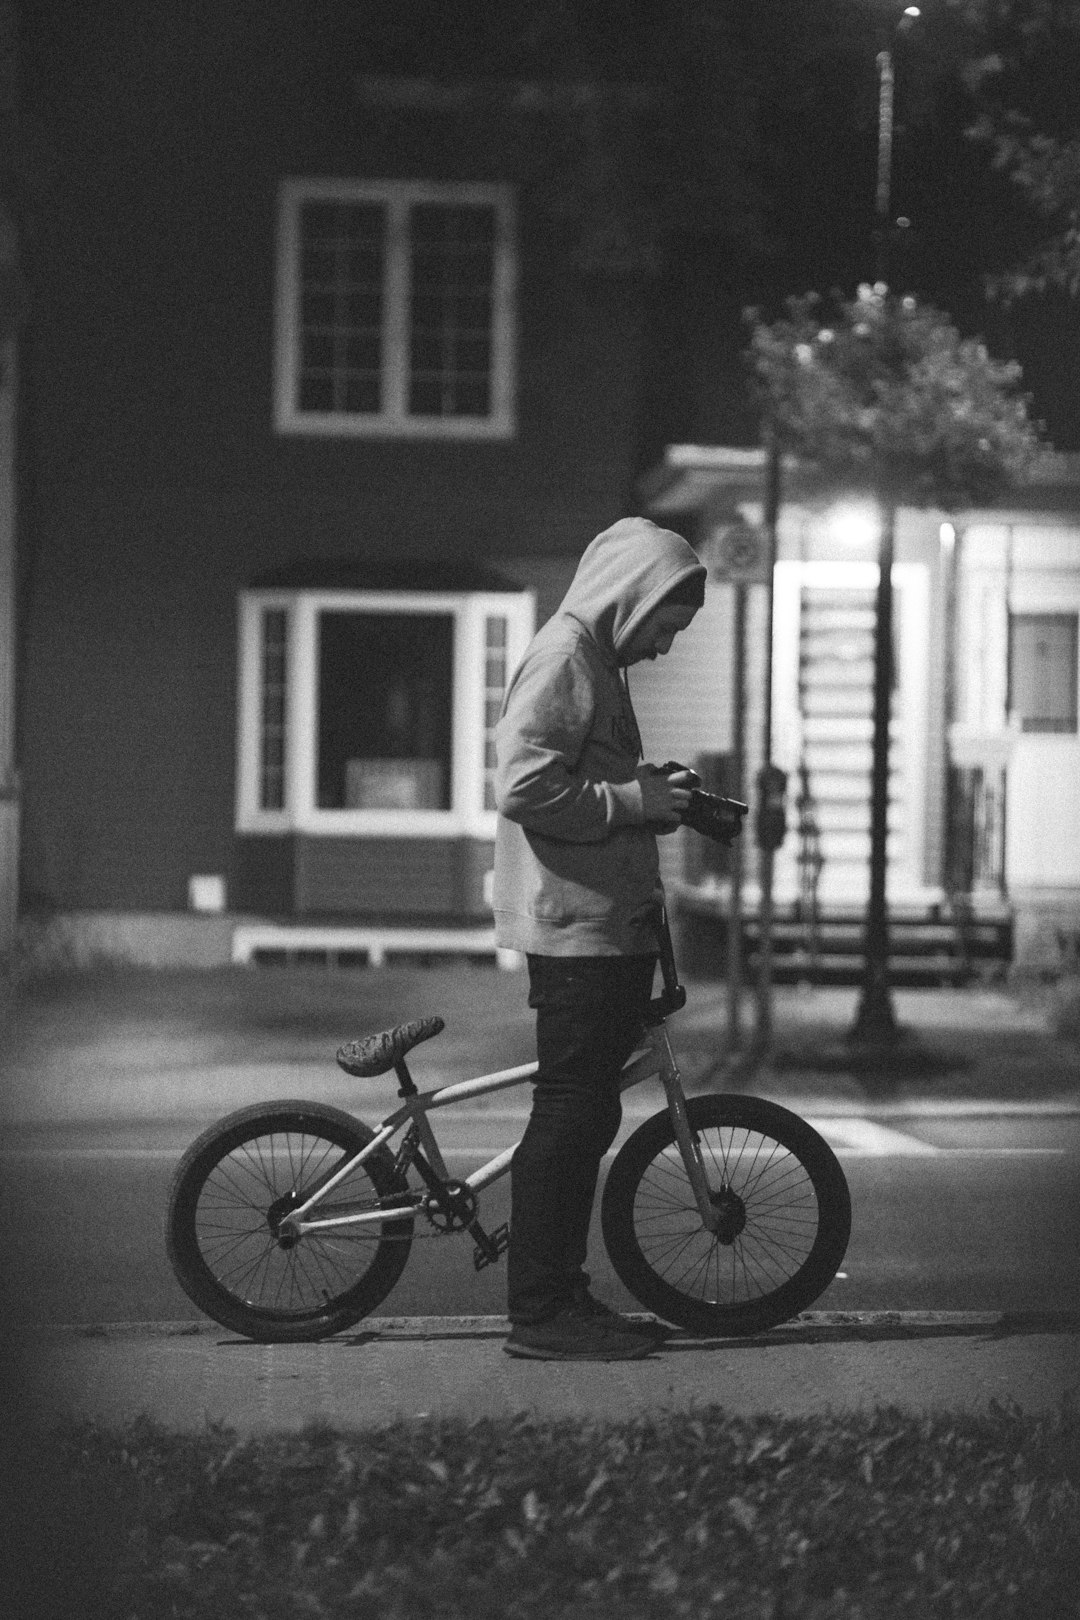 man riding bicycle in grayscale photography